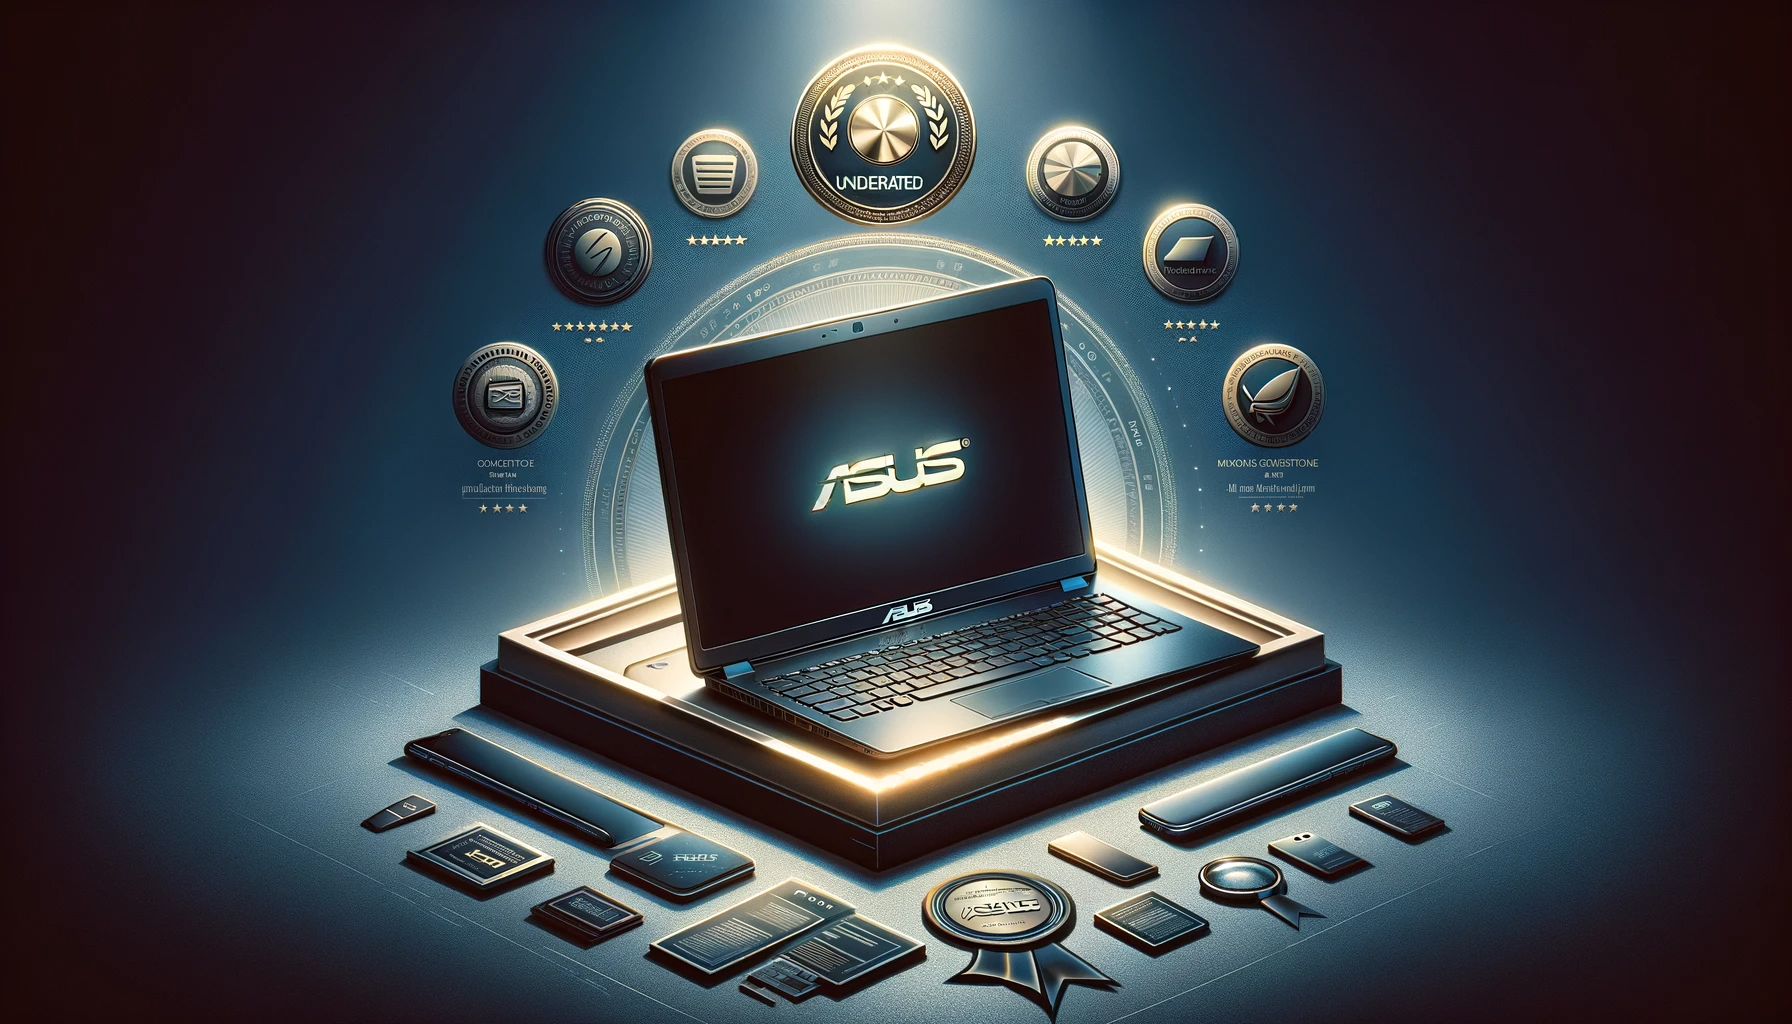 Why ASUS Is So Underrated